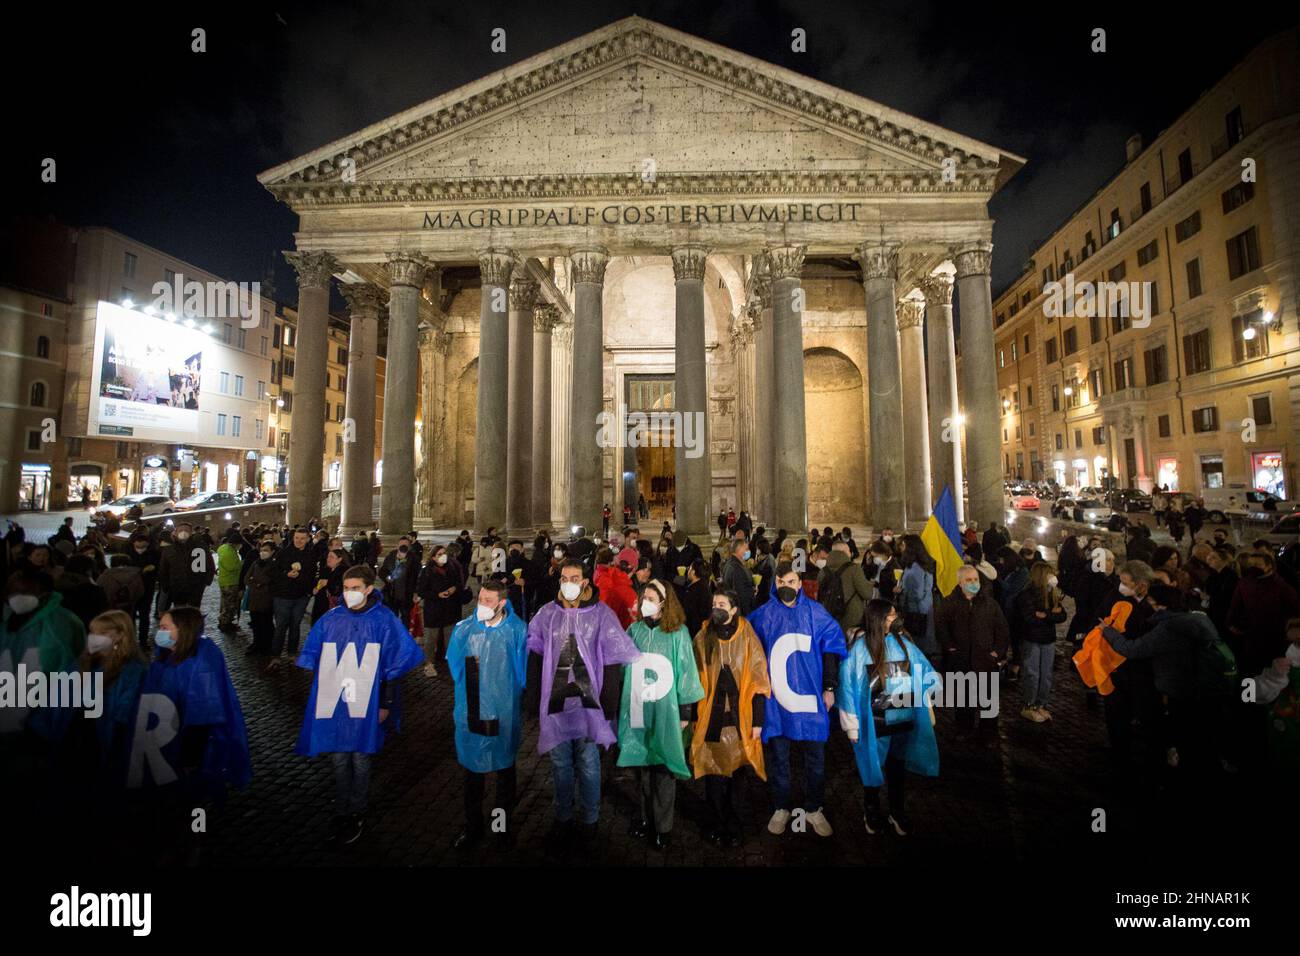 Rome, Italy. 15th Feb, 2022. Today, a No War candlelit vigil was held in Rome outside the Pantheon. The demonstration was organised by the Community of Sant’Egidio to call for peace between the Russian Federation and Ukraine. Stock Photo